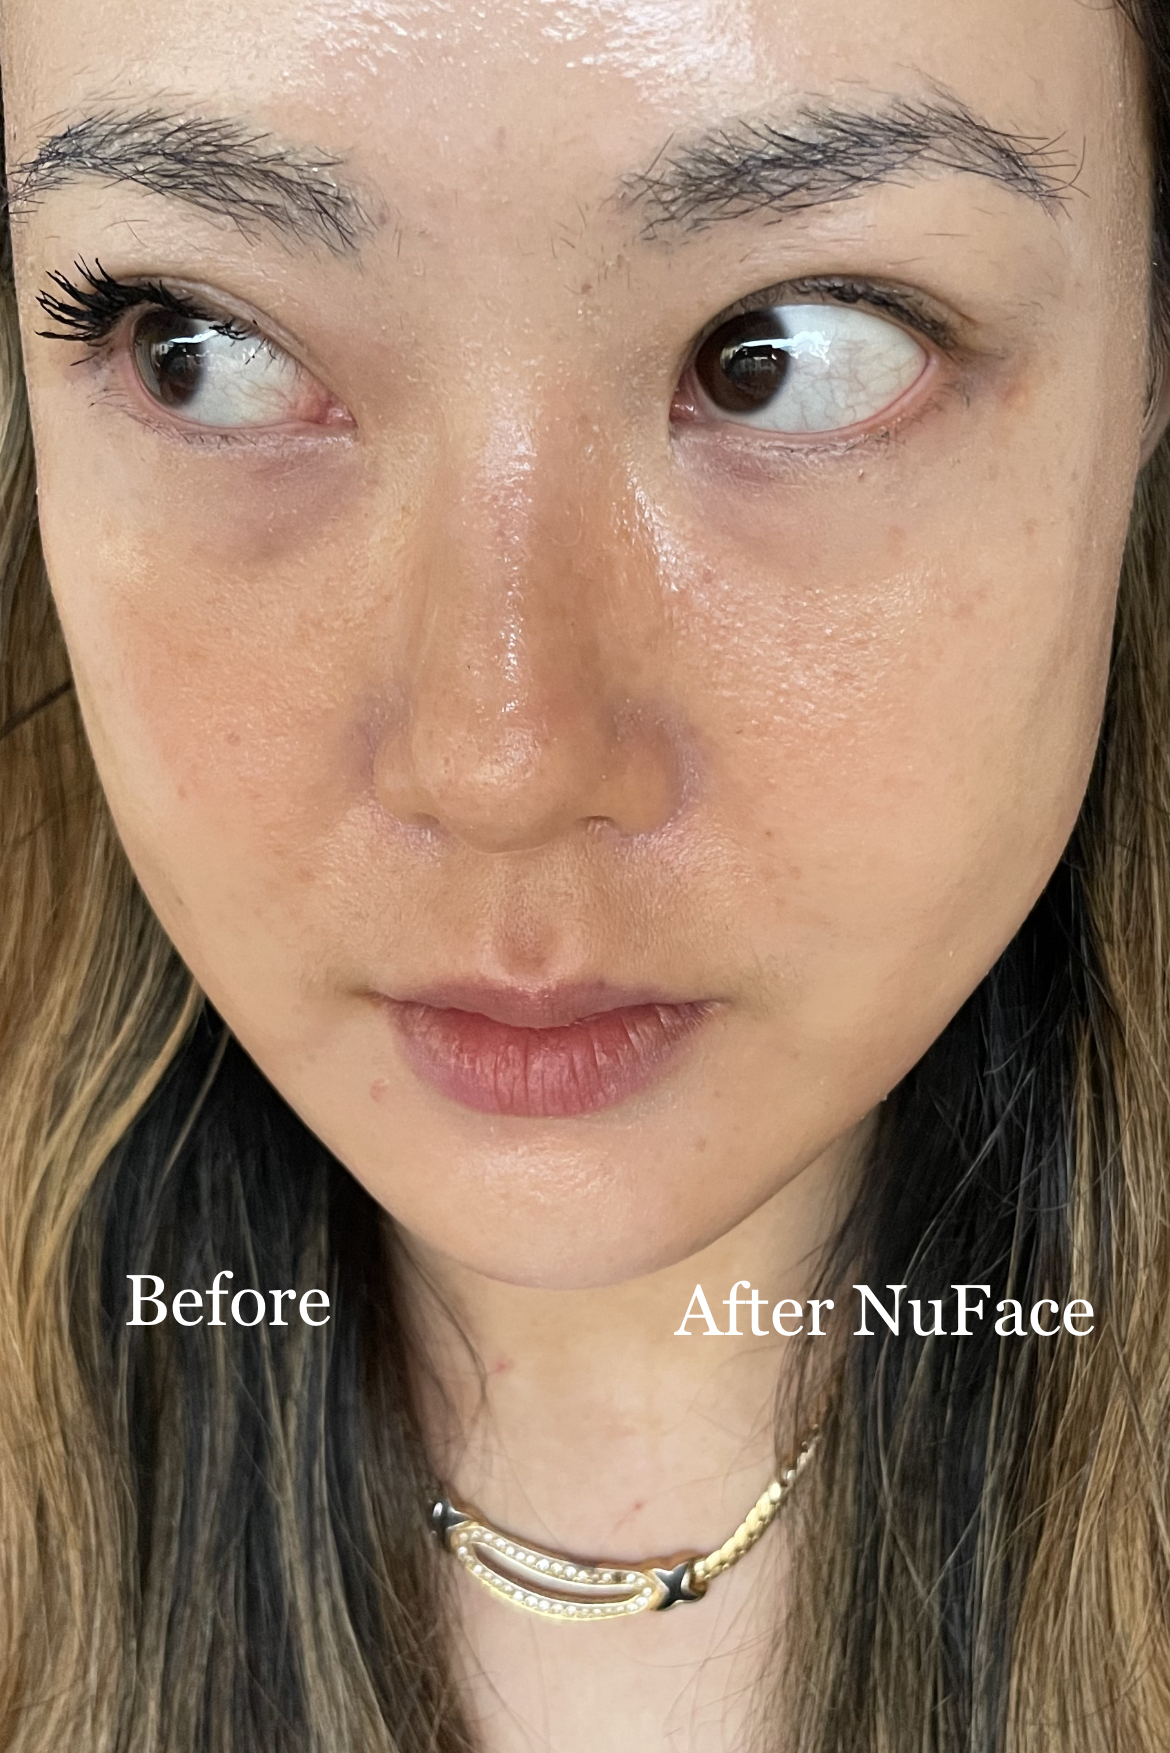 NuFace before and after photos